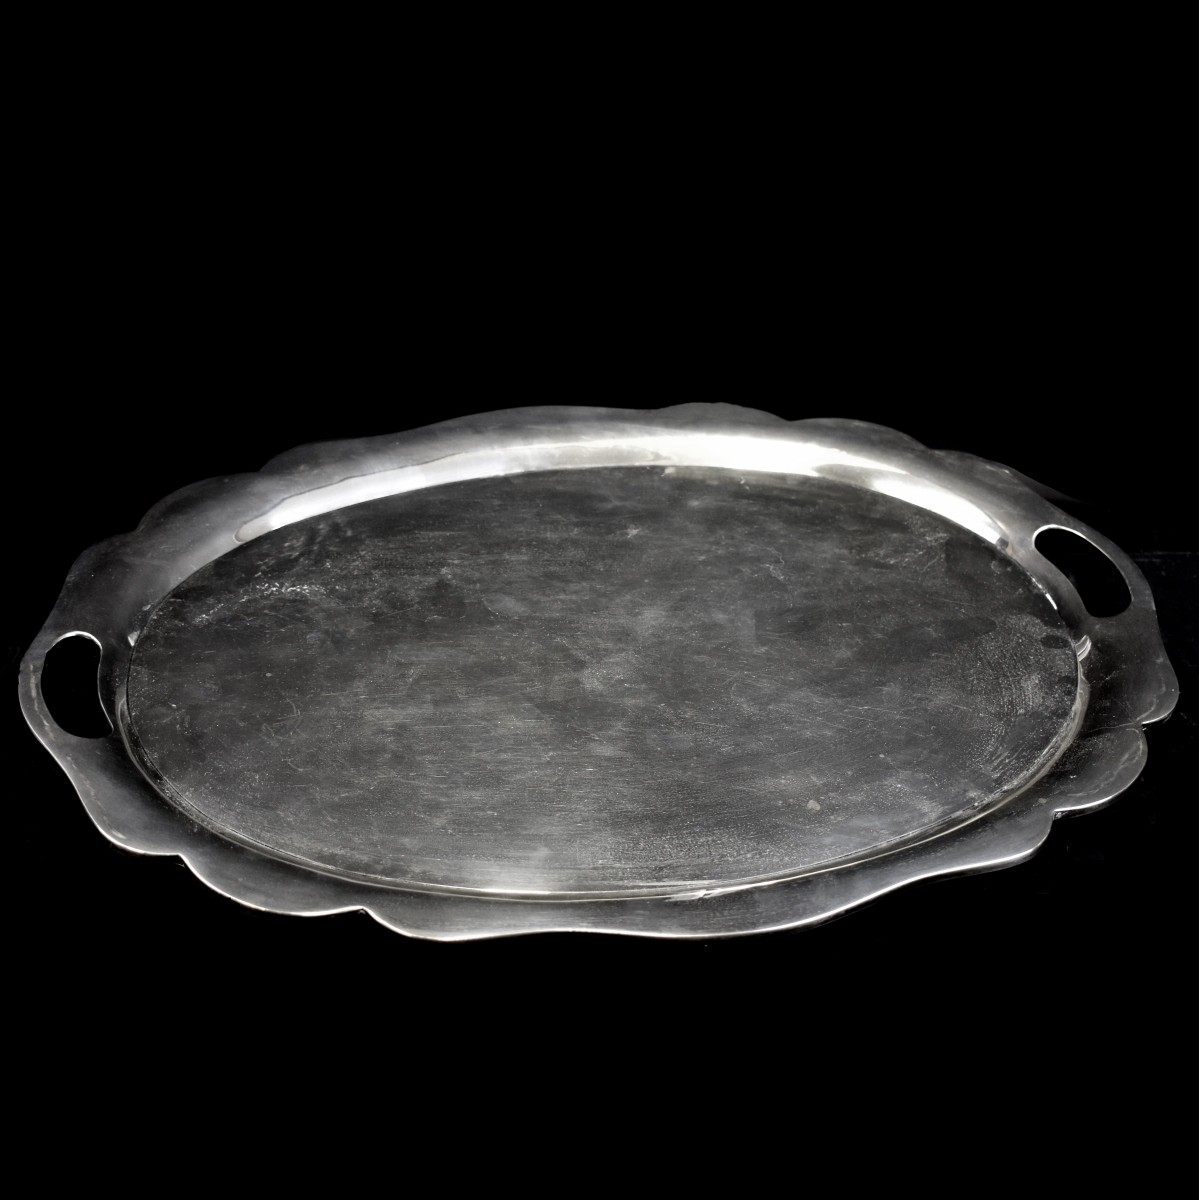 Mexican Sterling Silver Tray